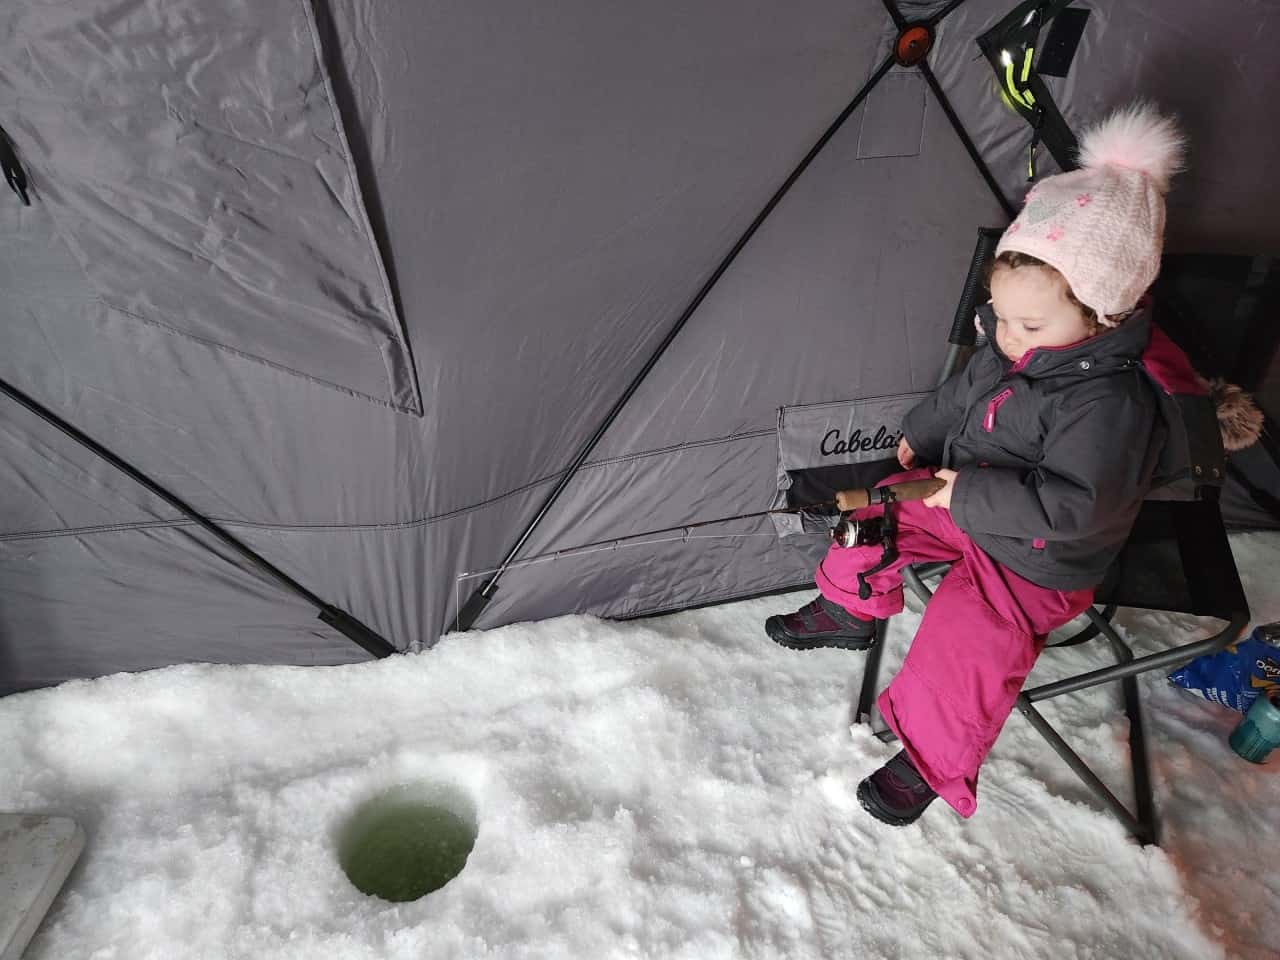 The Buffalo Lake Fishing Derby is a family friendly event held on Family Day in Canada.